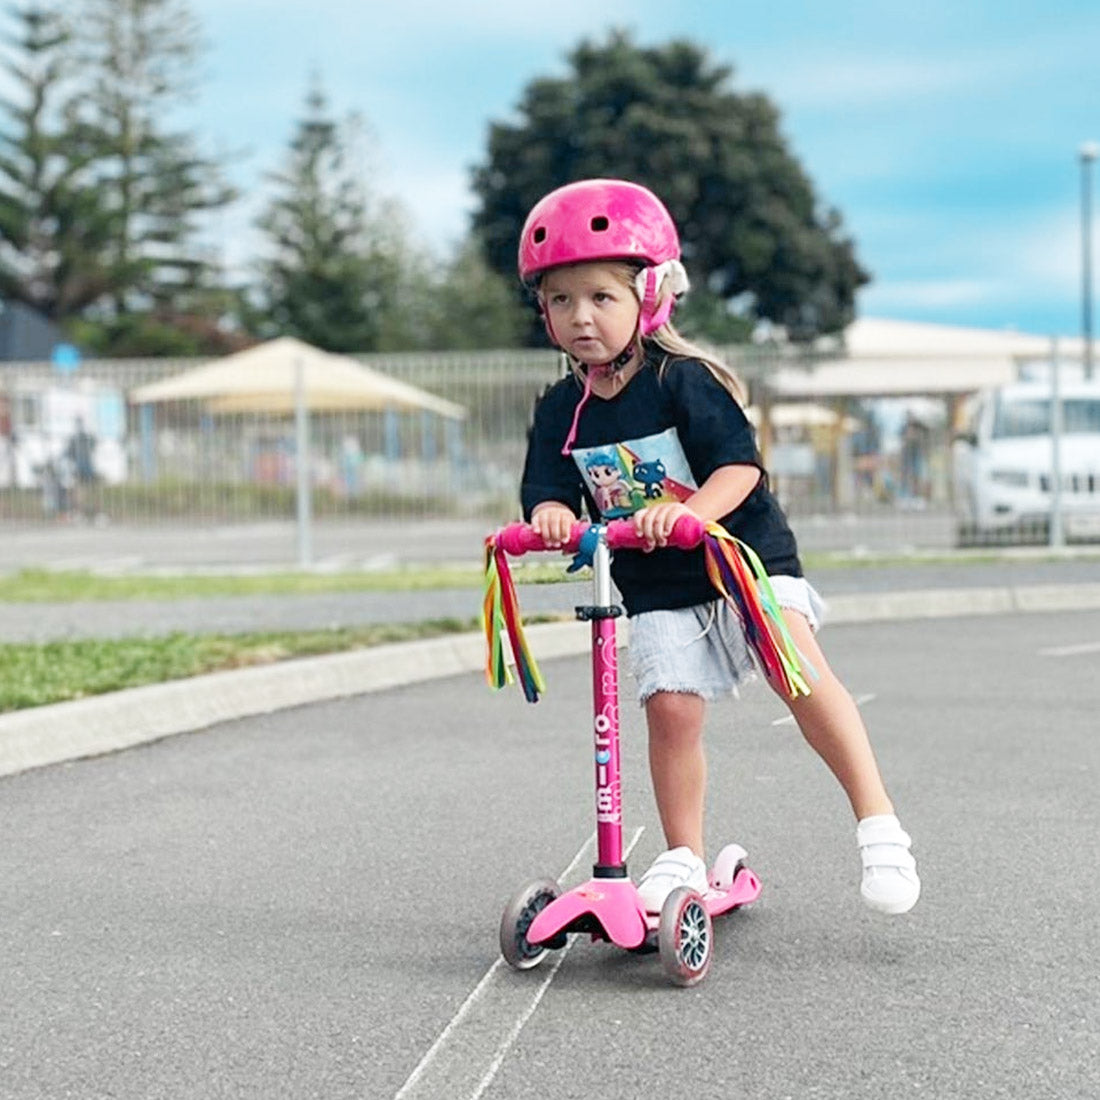 Micro Mini Deluxe Scooter - Pink Scooter Completes Rec